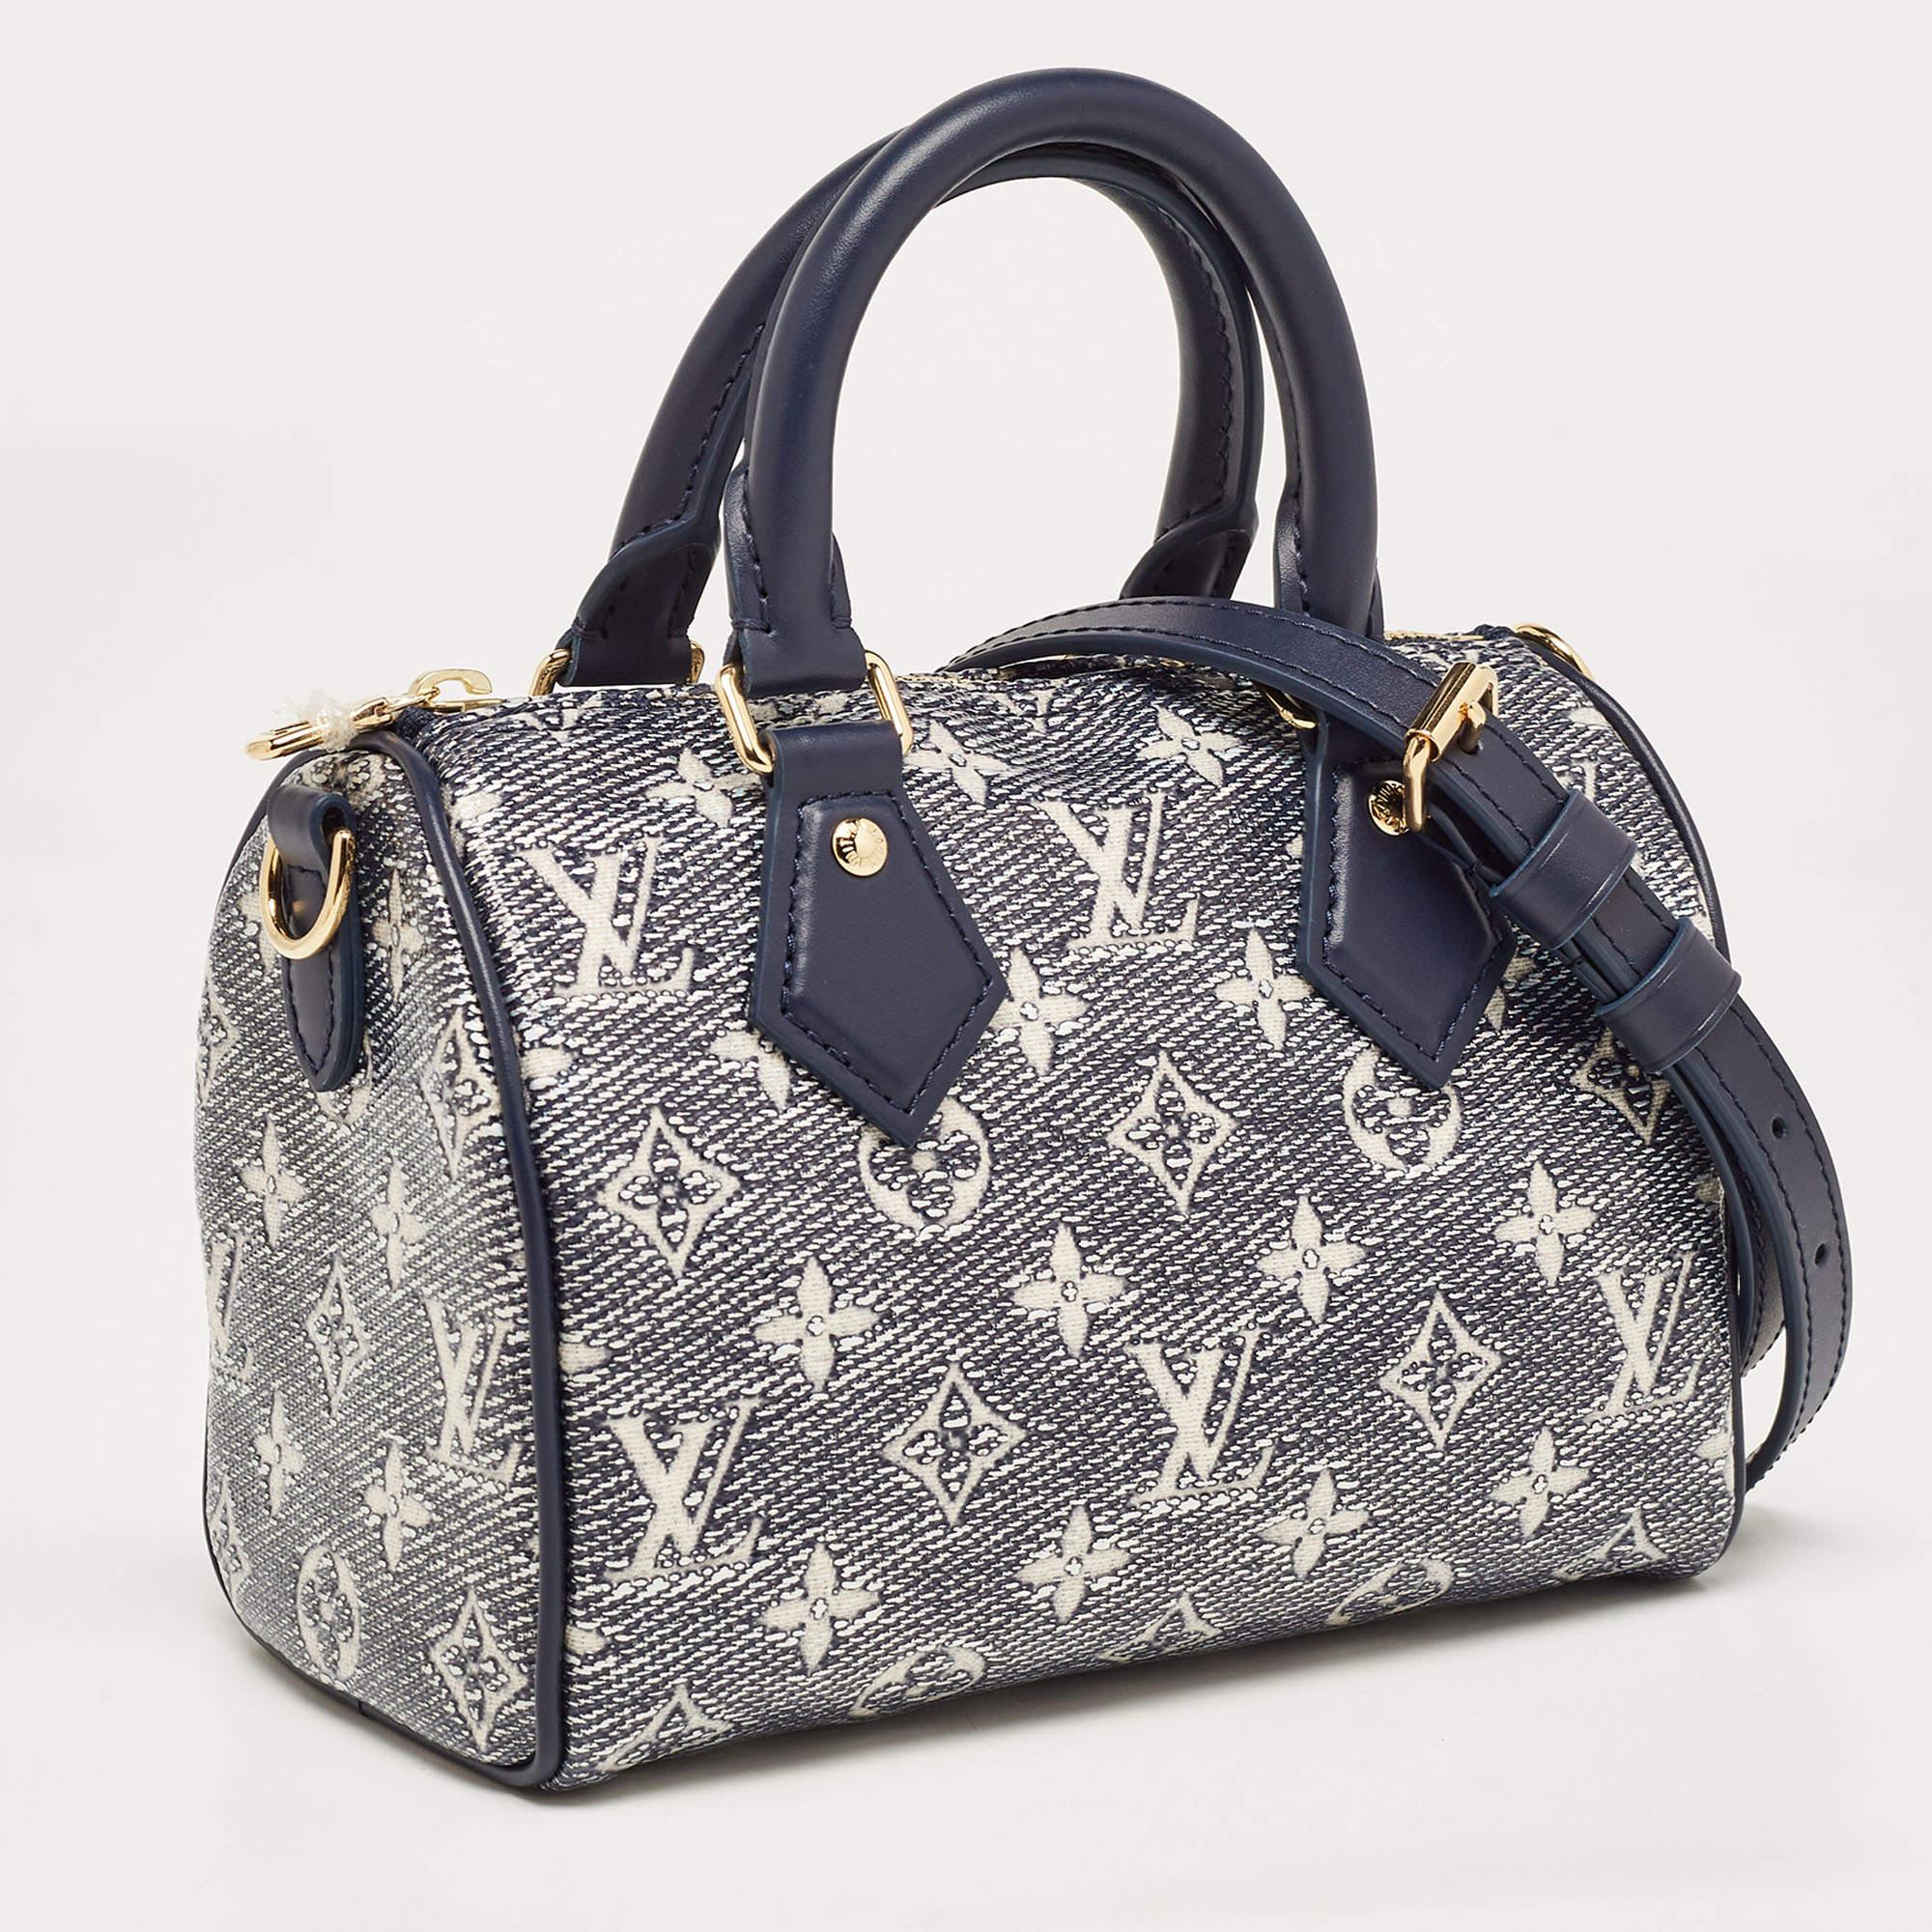 A classic handbag comes with the promise of enduring appeal, boosting your style time and again. This Louis Vuitton Speedy Bandouliere 20 is one such creation. It’s a fine purchase.

